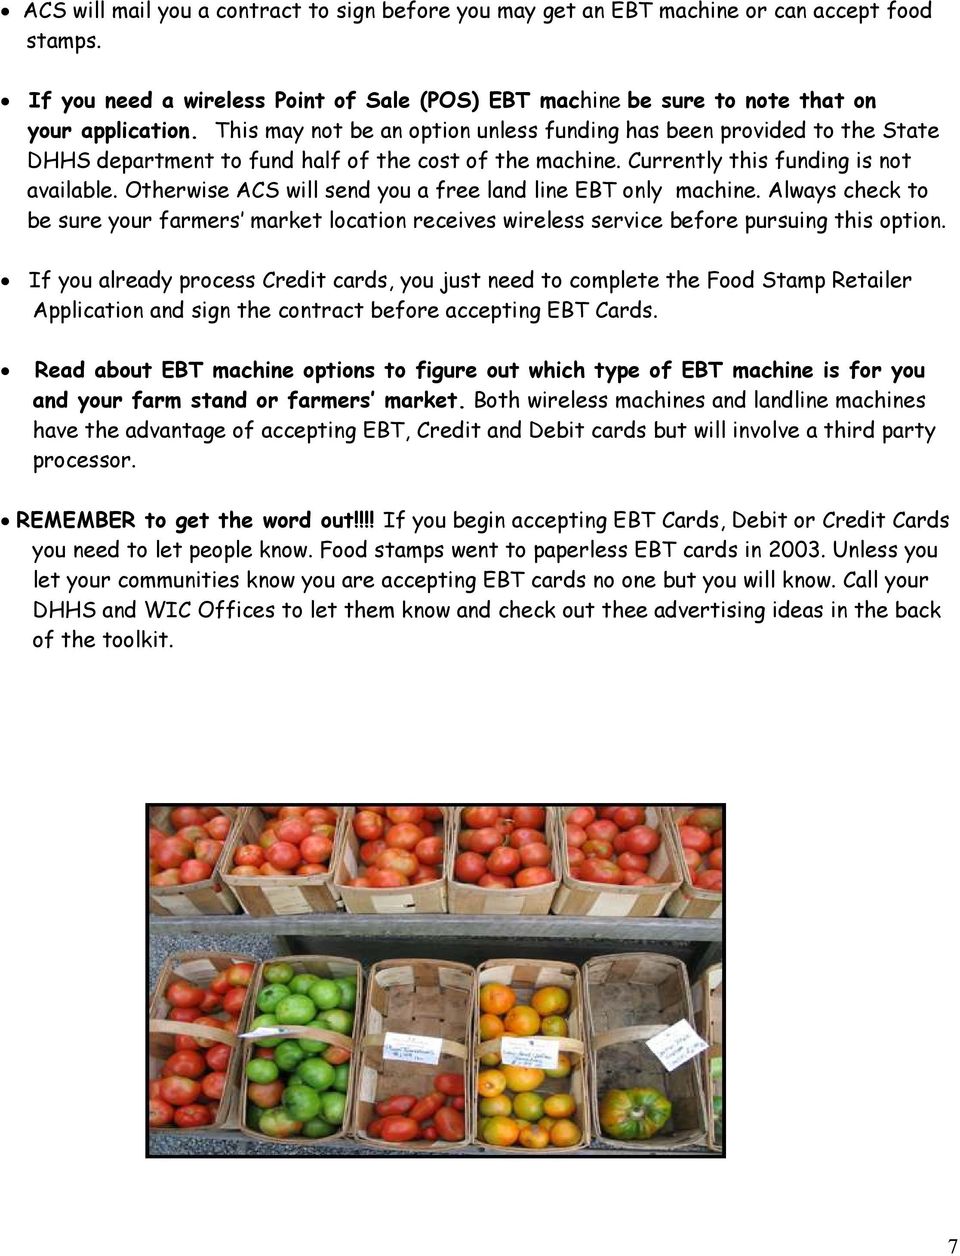 Otherwise ACS will send you a free land line EBT only machine. Always check to be sure your farmers market location receives wireless service before pursuing this option.